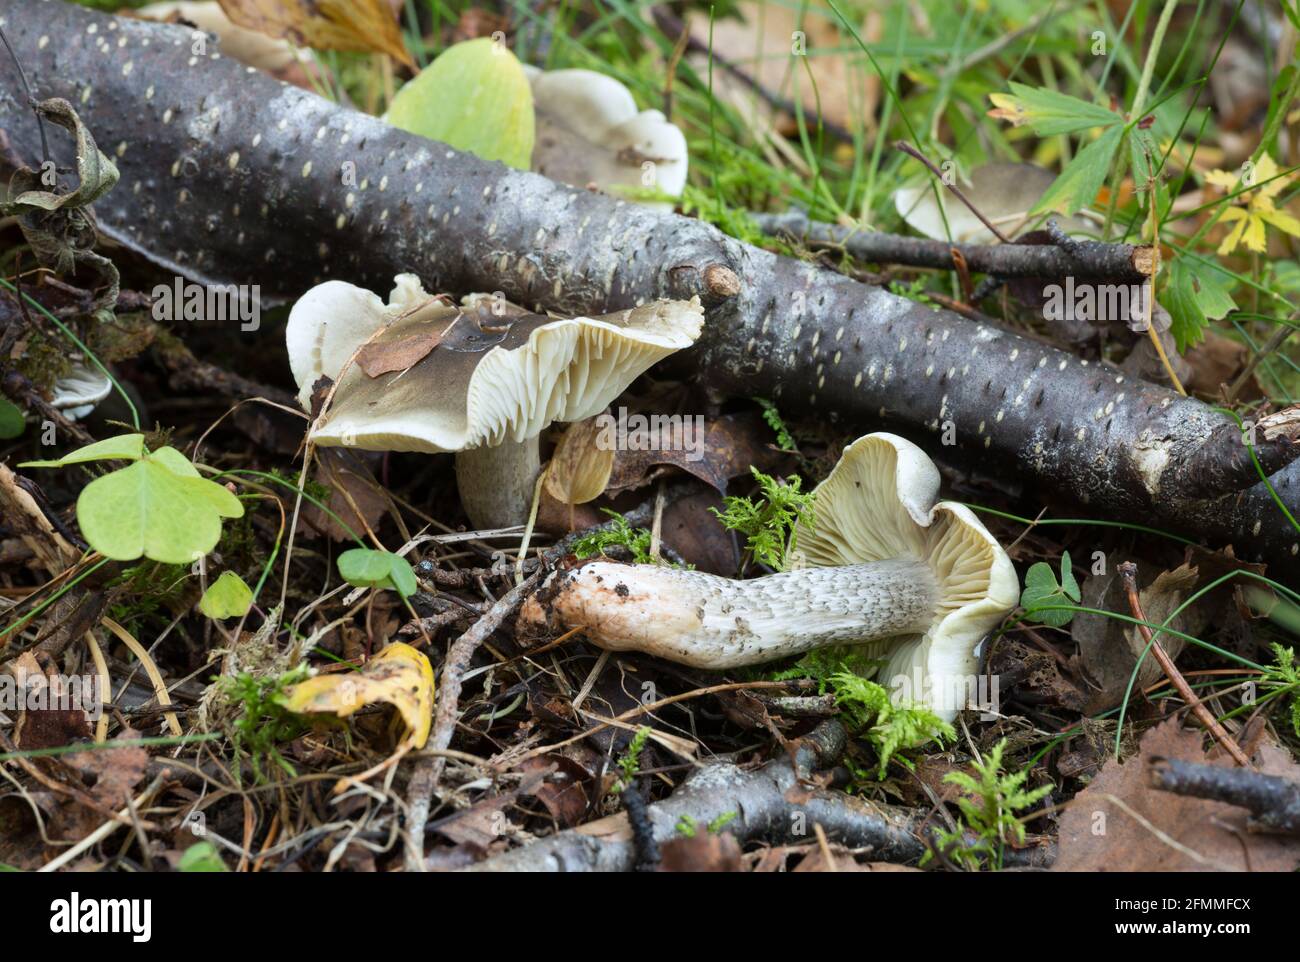 Soap-scented toadstool growing among leafs Stock Photo